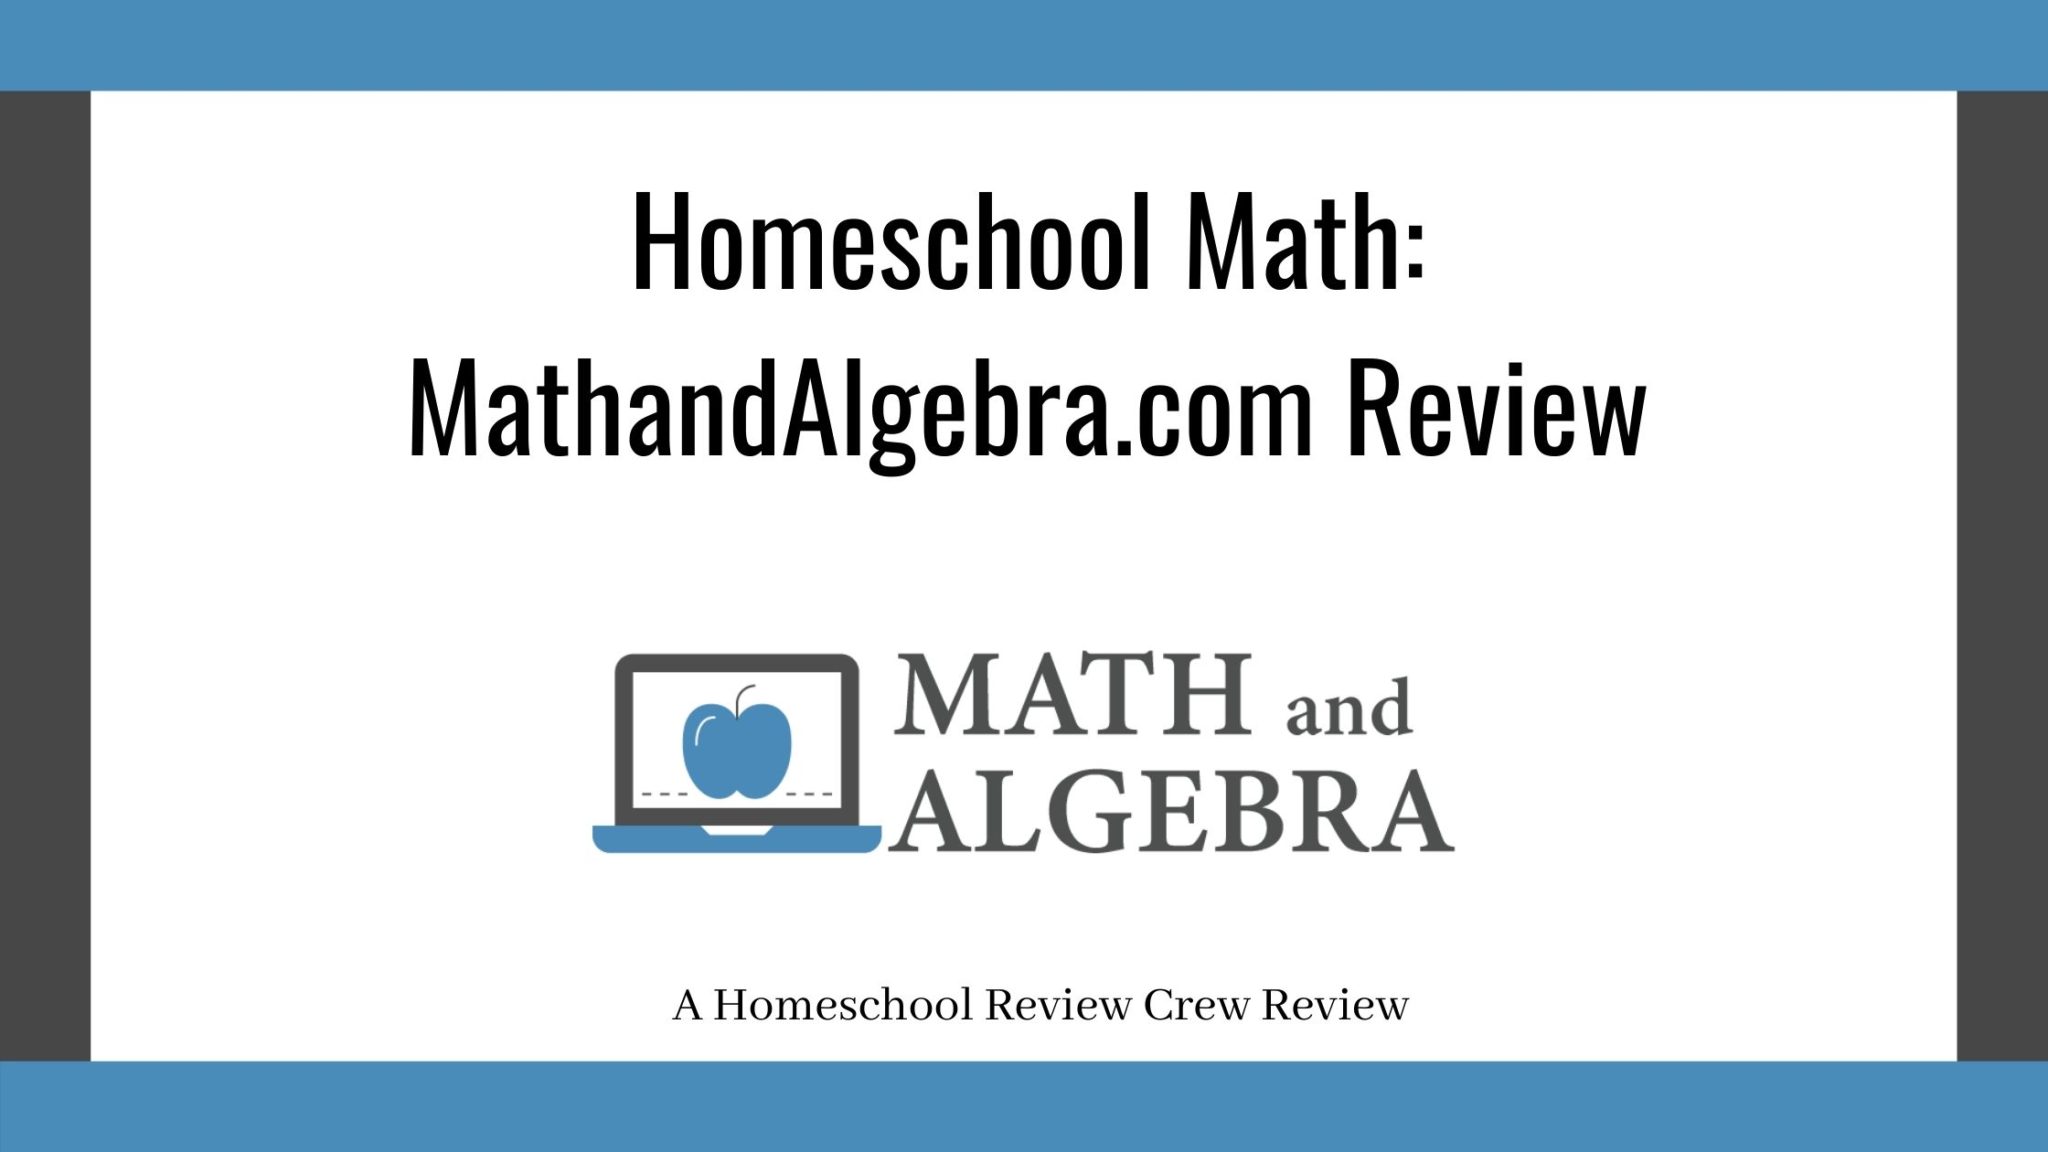 You are currently viewing Homeschool Math- MathandAlgebra.com Review